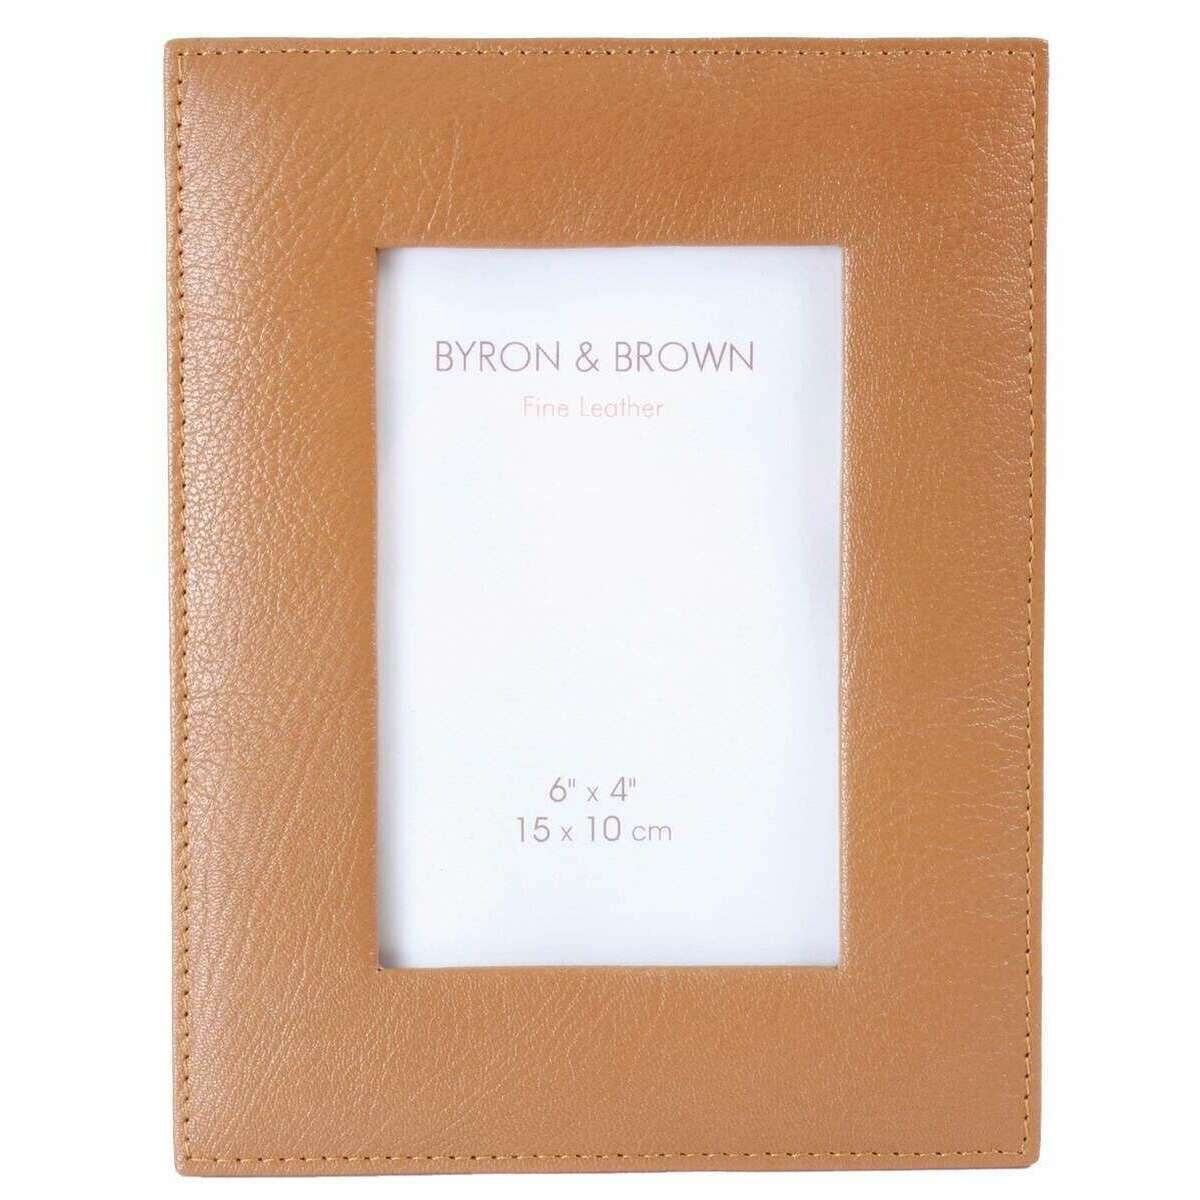 Byron and Brown Vintage Leather Photo Frame 6x4 - Tan